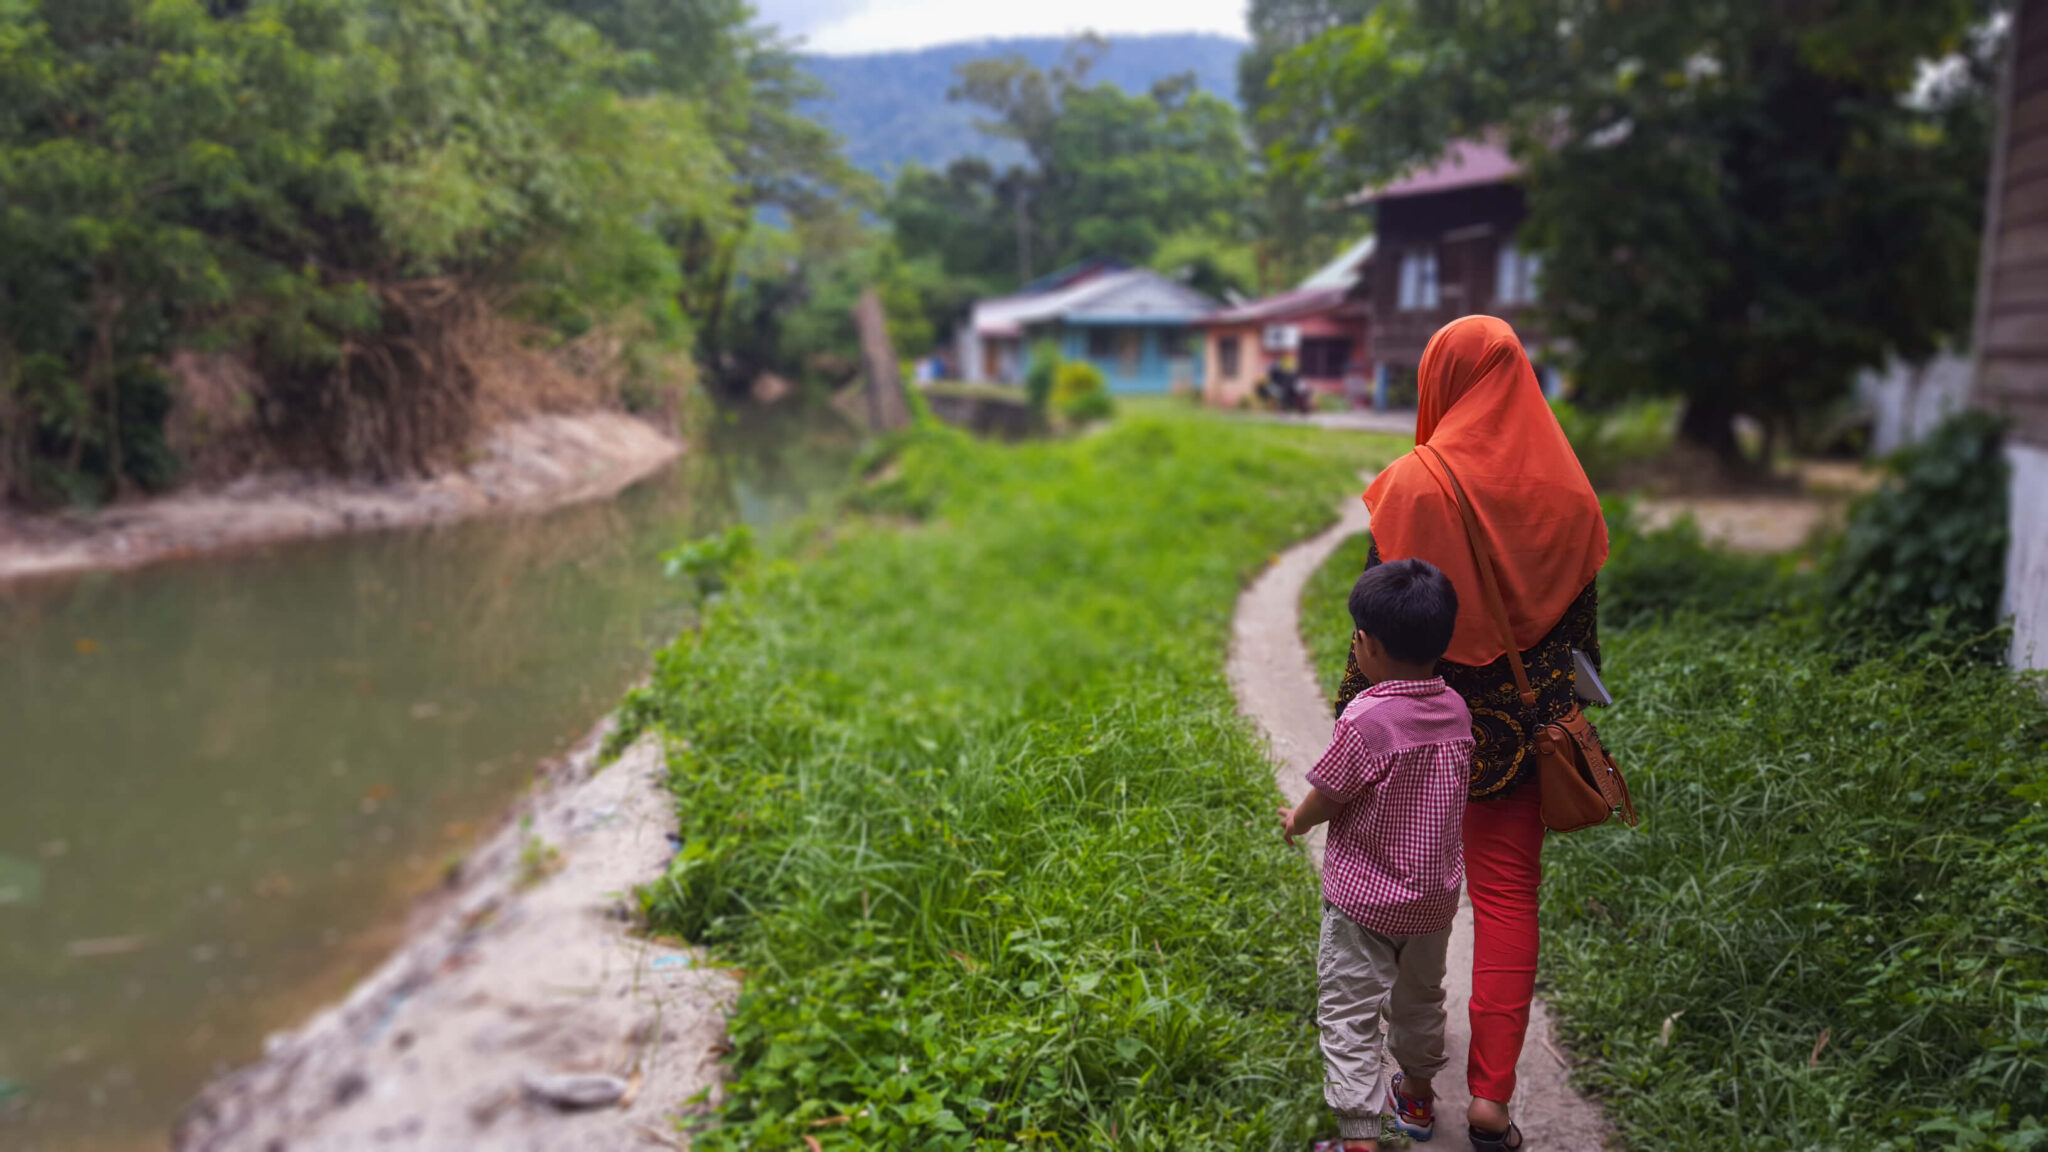 A woman and child walking to a village along a dirt path.